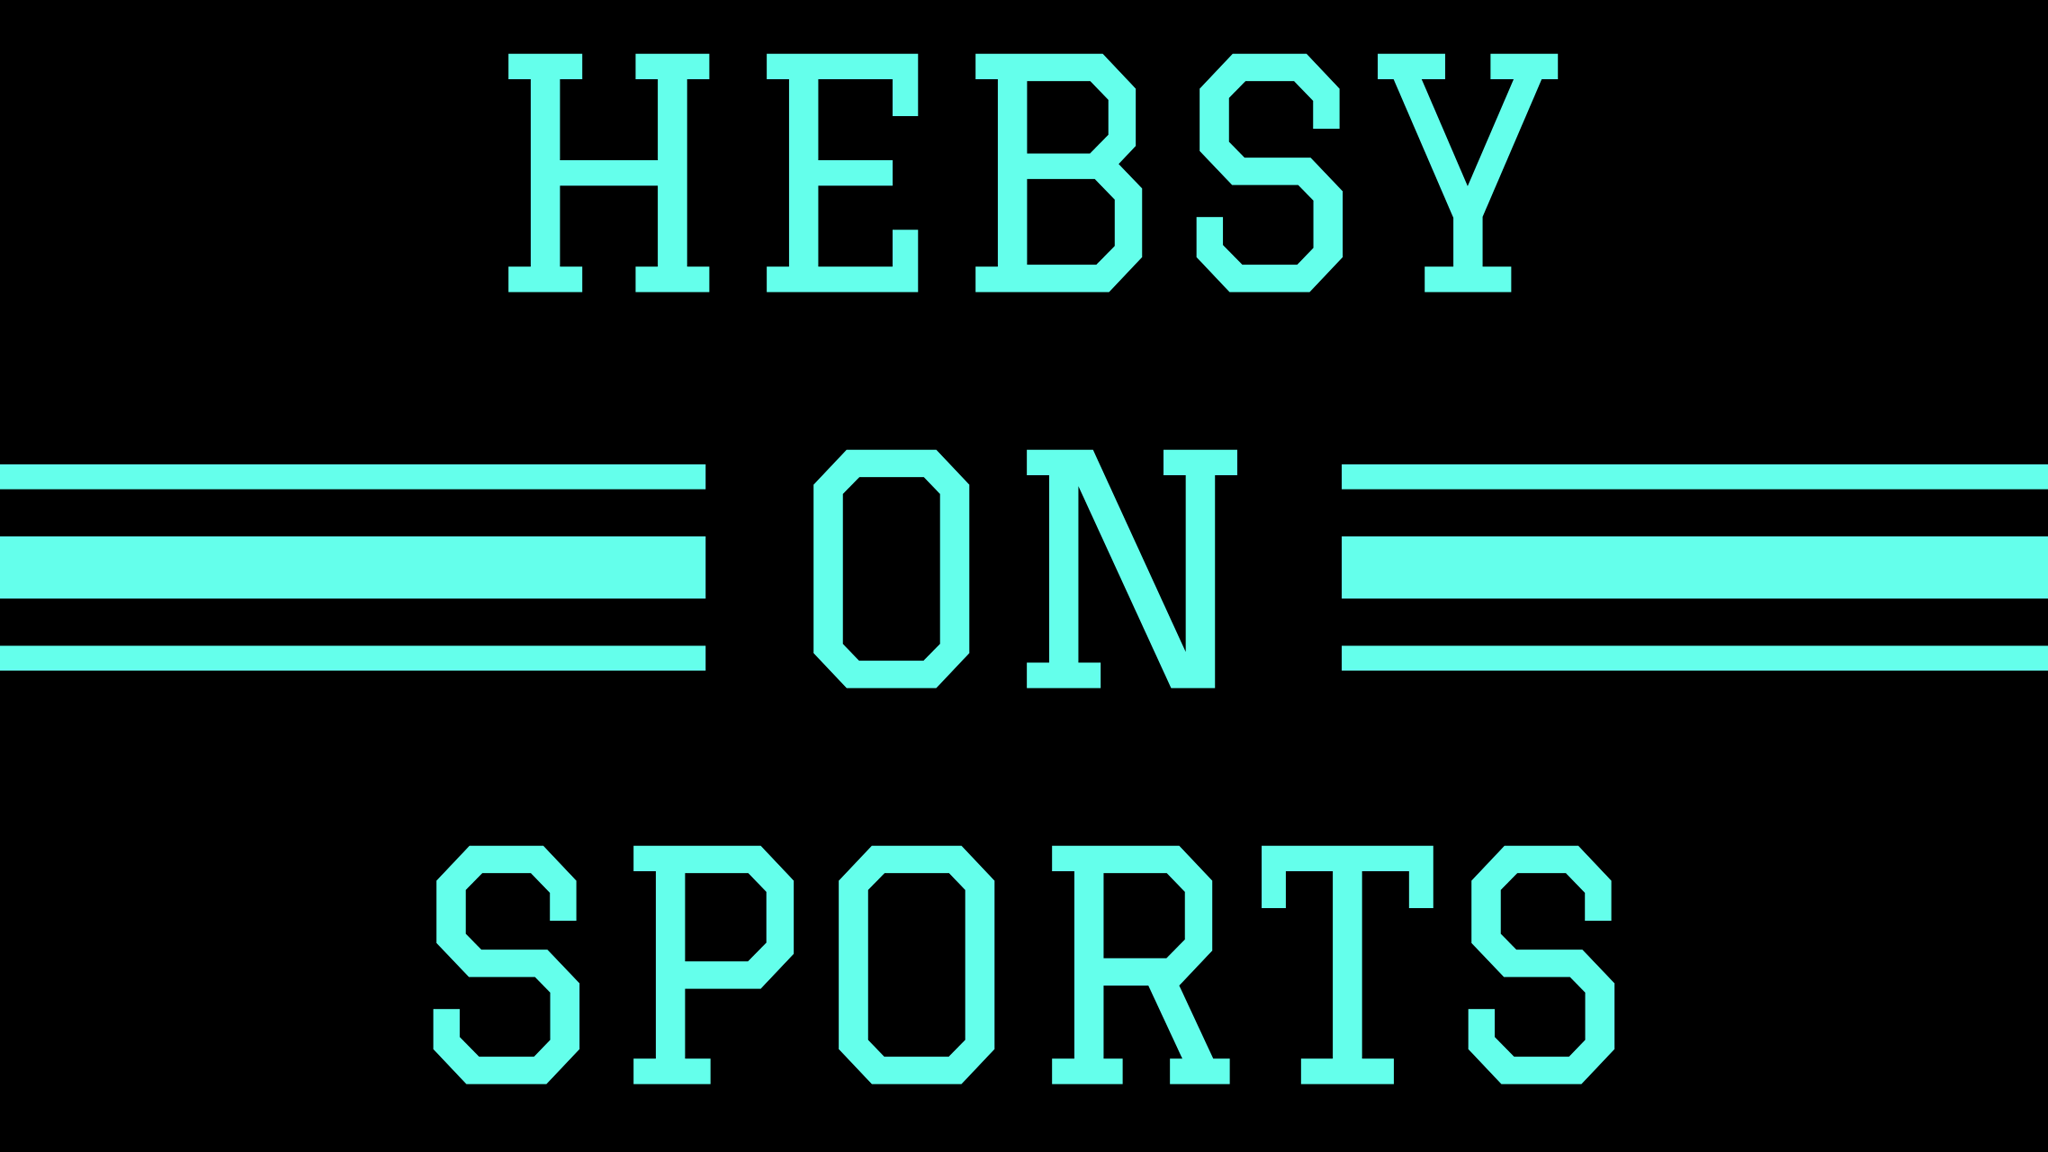 Hebsy on Sports for July 9, 2021